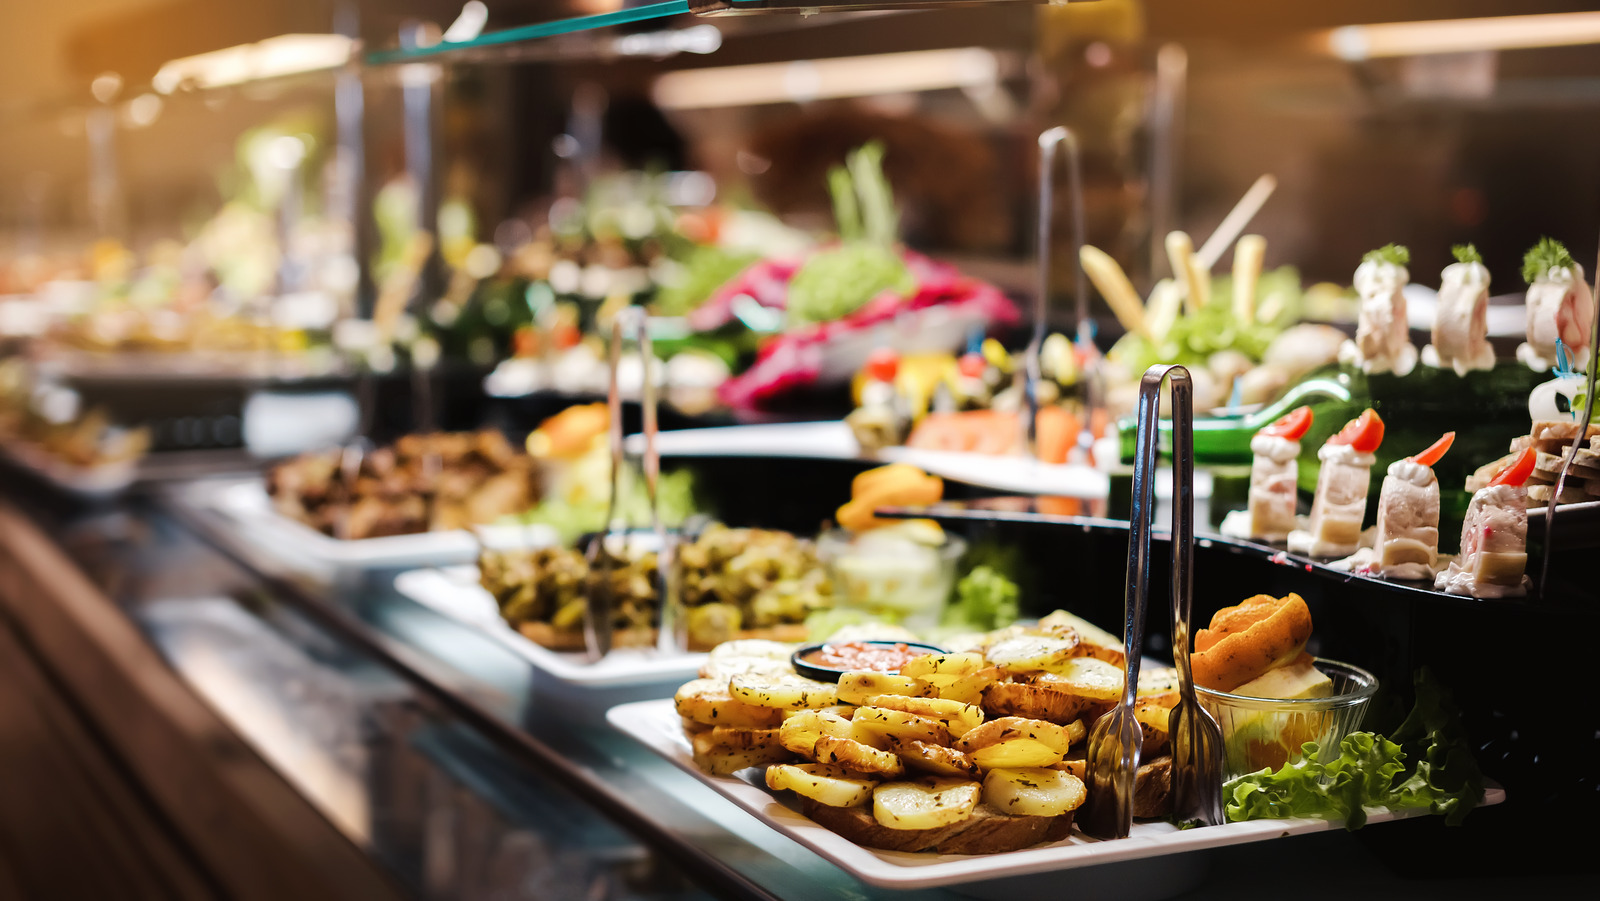 The Absolute Best Buffet Restaurants In The .